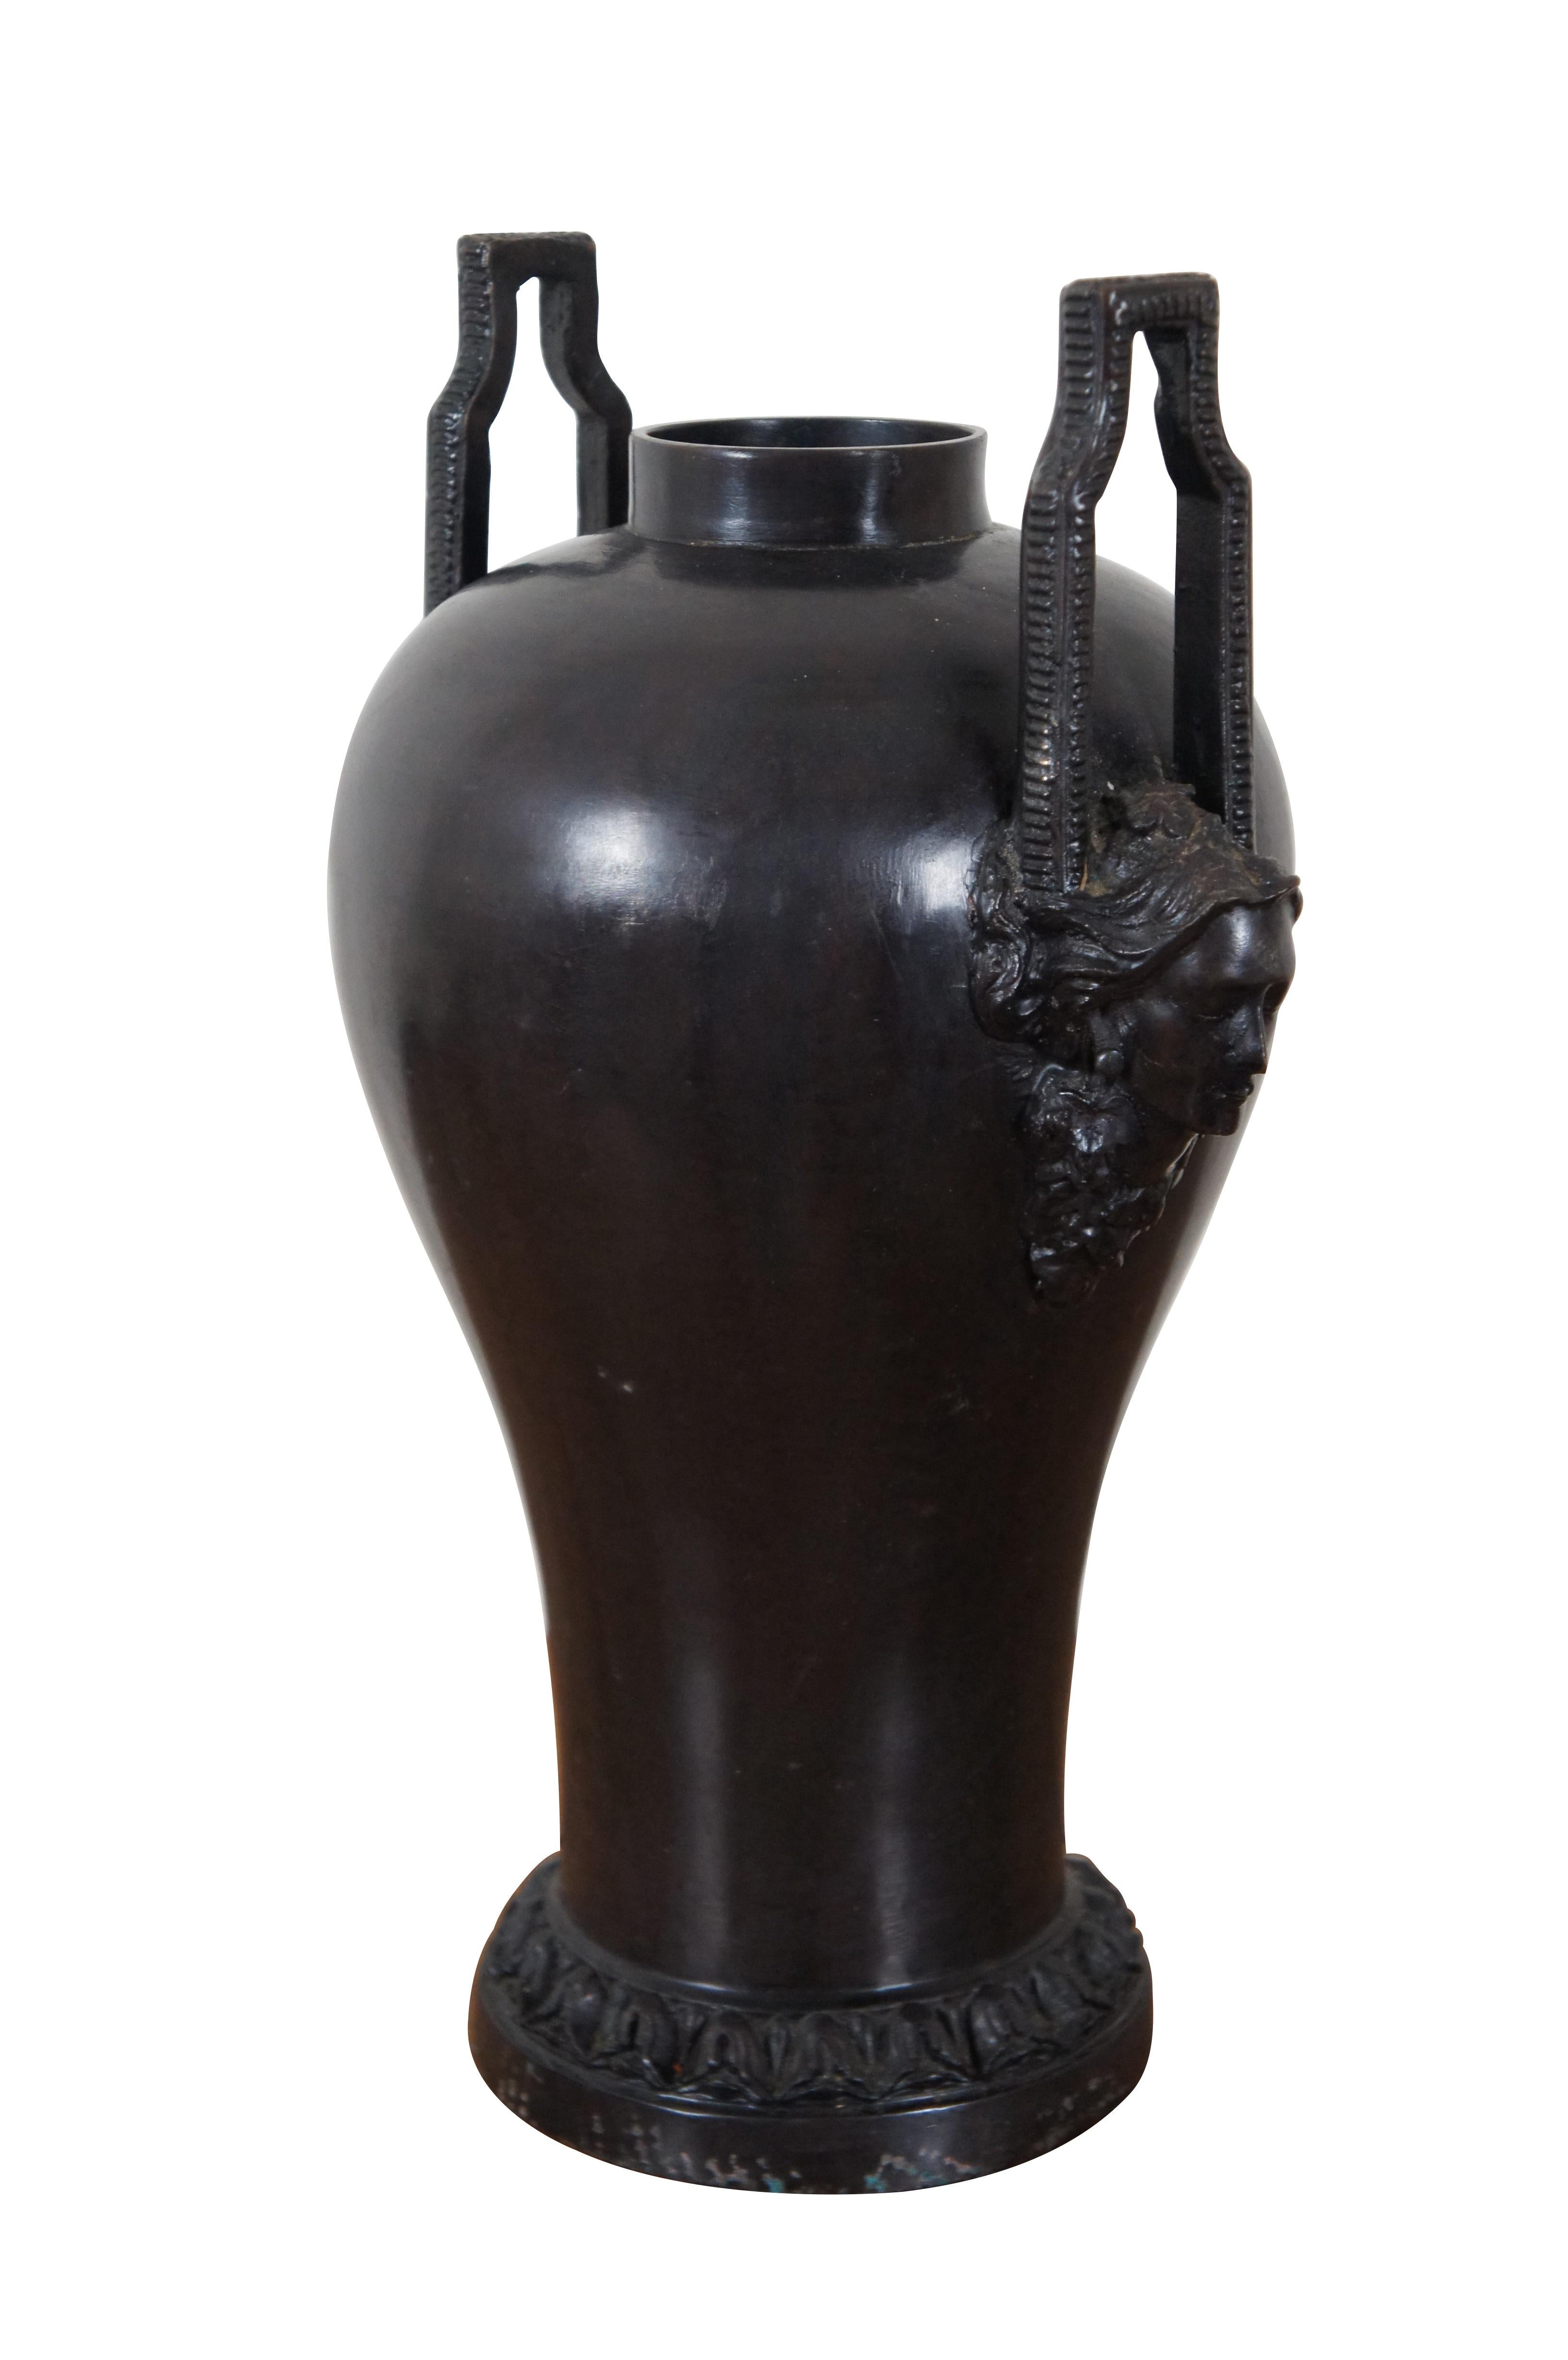 Heavy vintage Maitland Smith Art Nouveau style bronze urn / vase / vessel featuring high keyhole handles with a ridged texture above a pair of female bust faces in high bas relief, and a foliate band around the base. 

Dimensions:
12” x 8.5” x